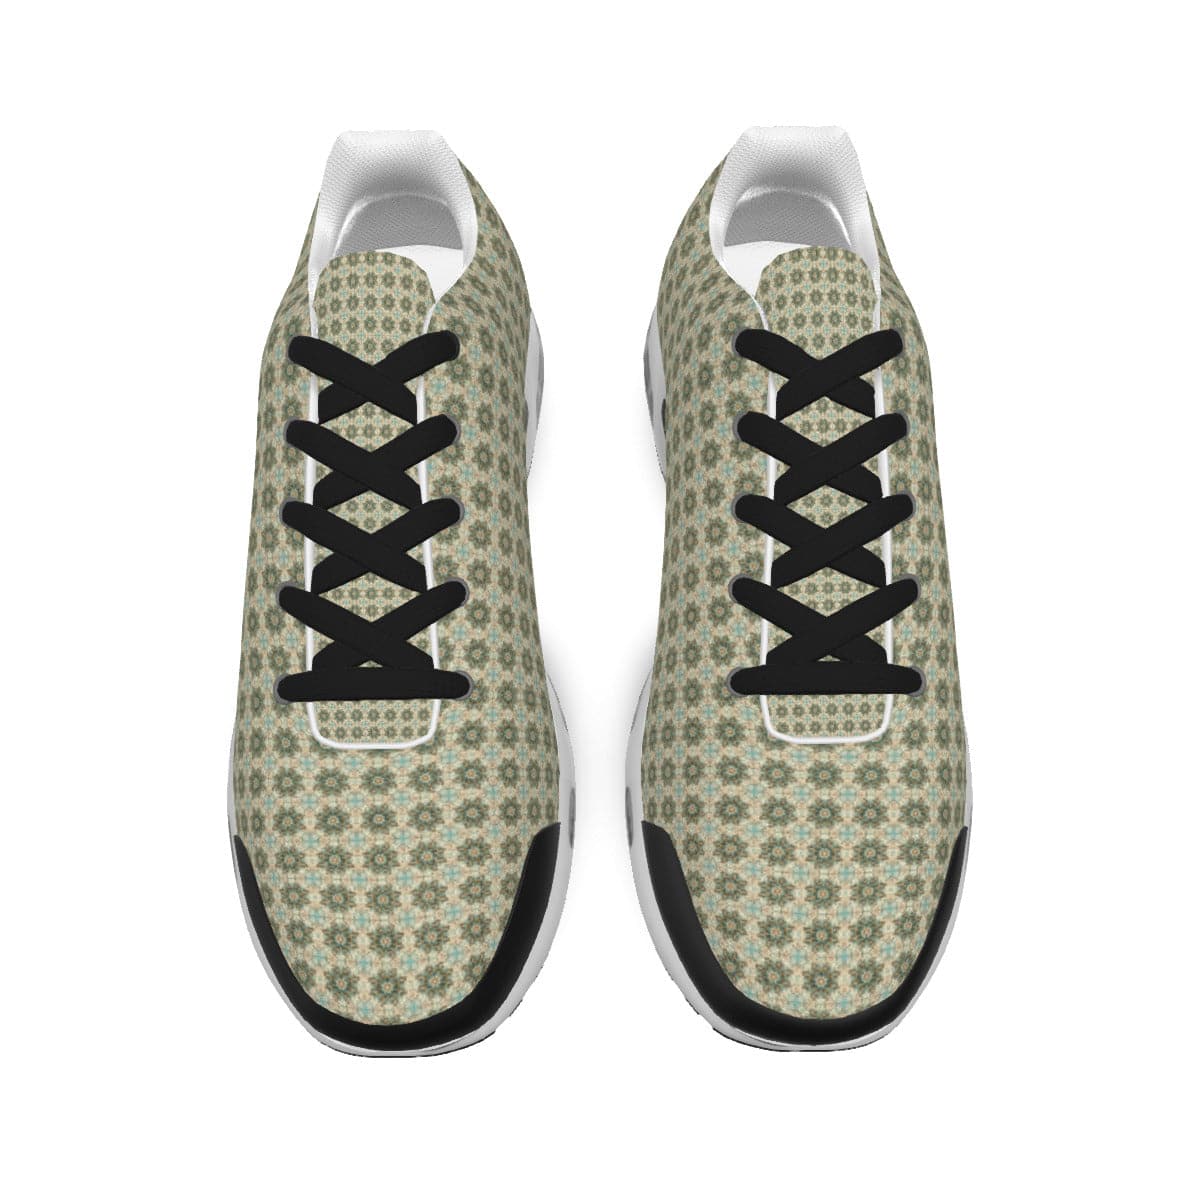 Soft Green fine Patterned Trendy Men's Air Cushion Sports Shoes, by Sensus Studio Design